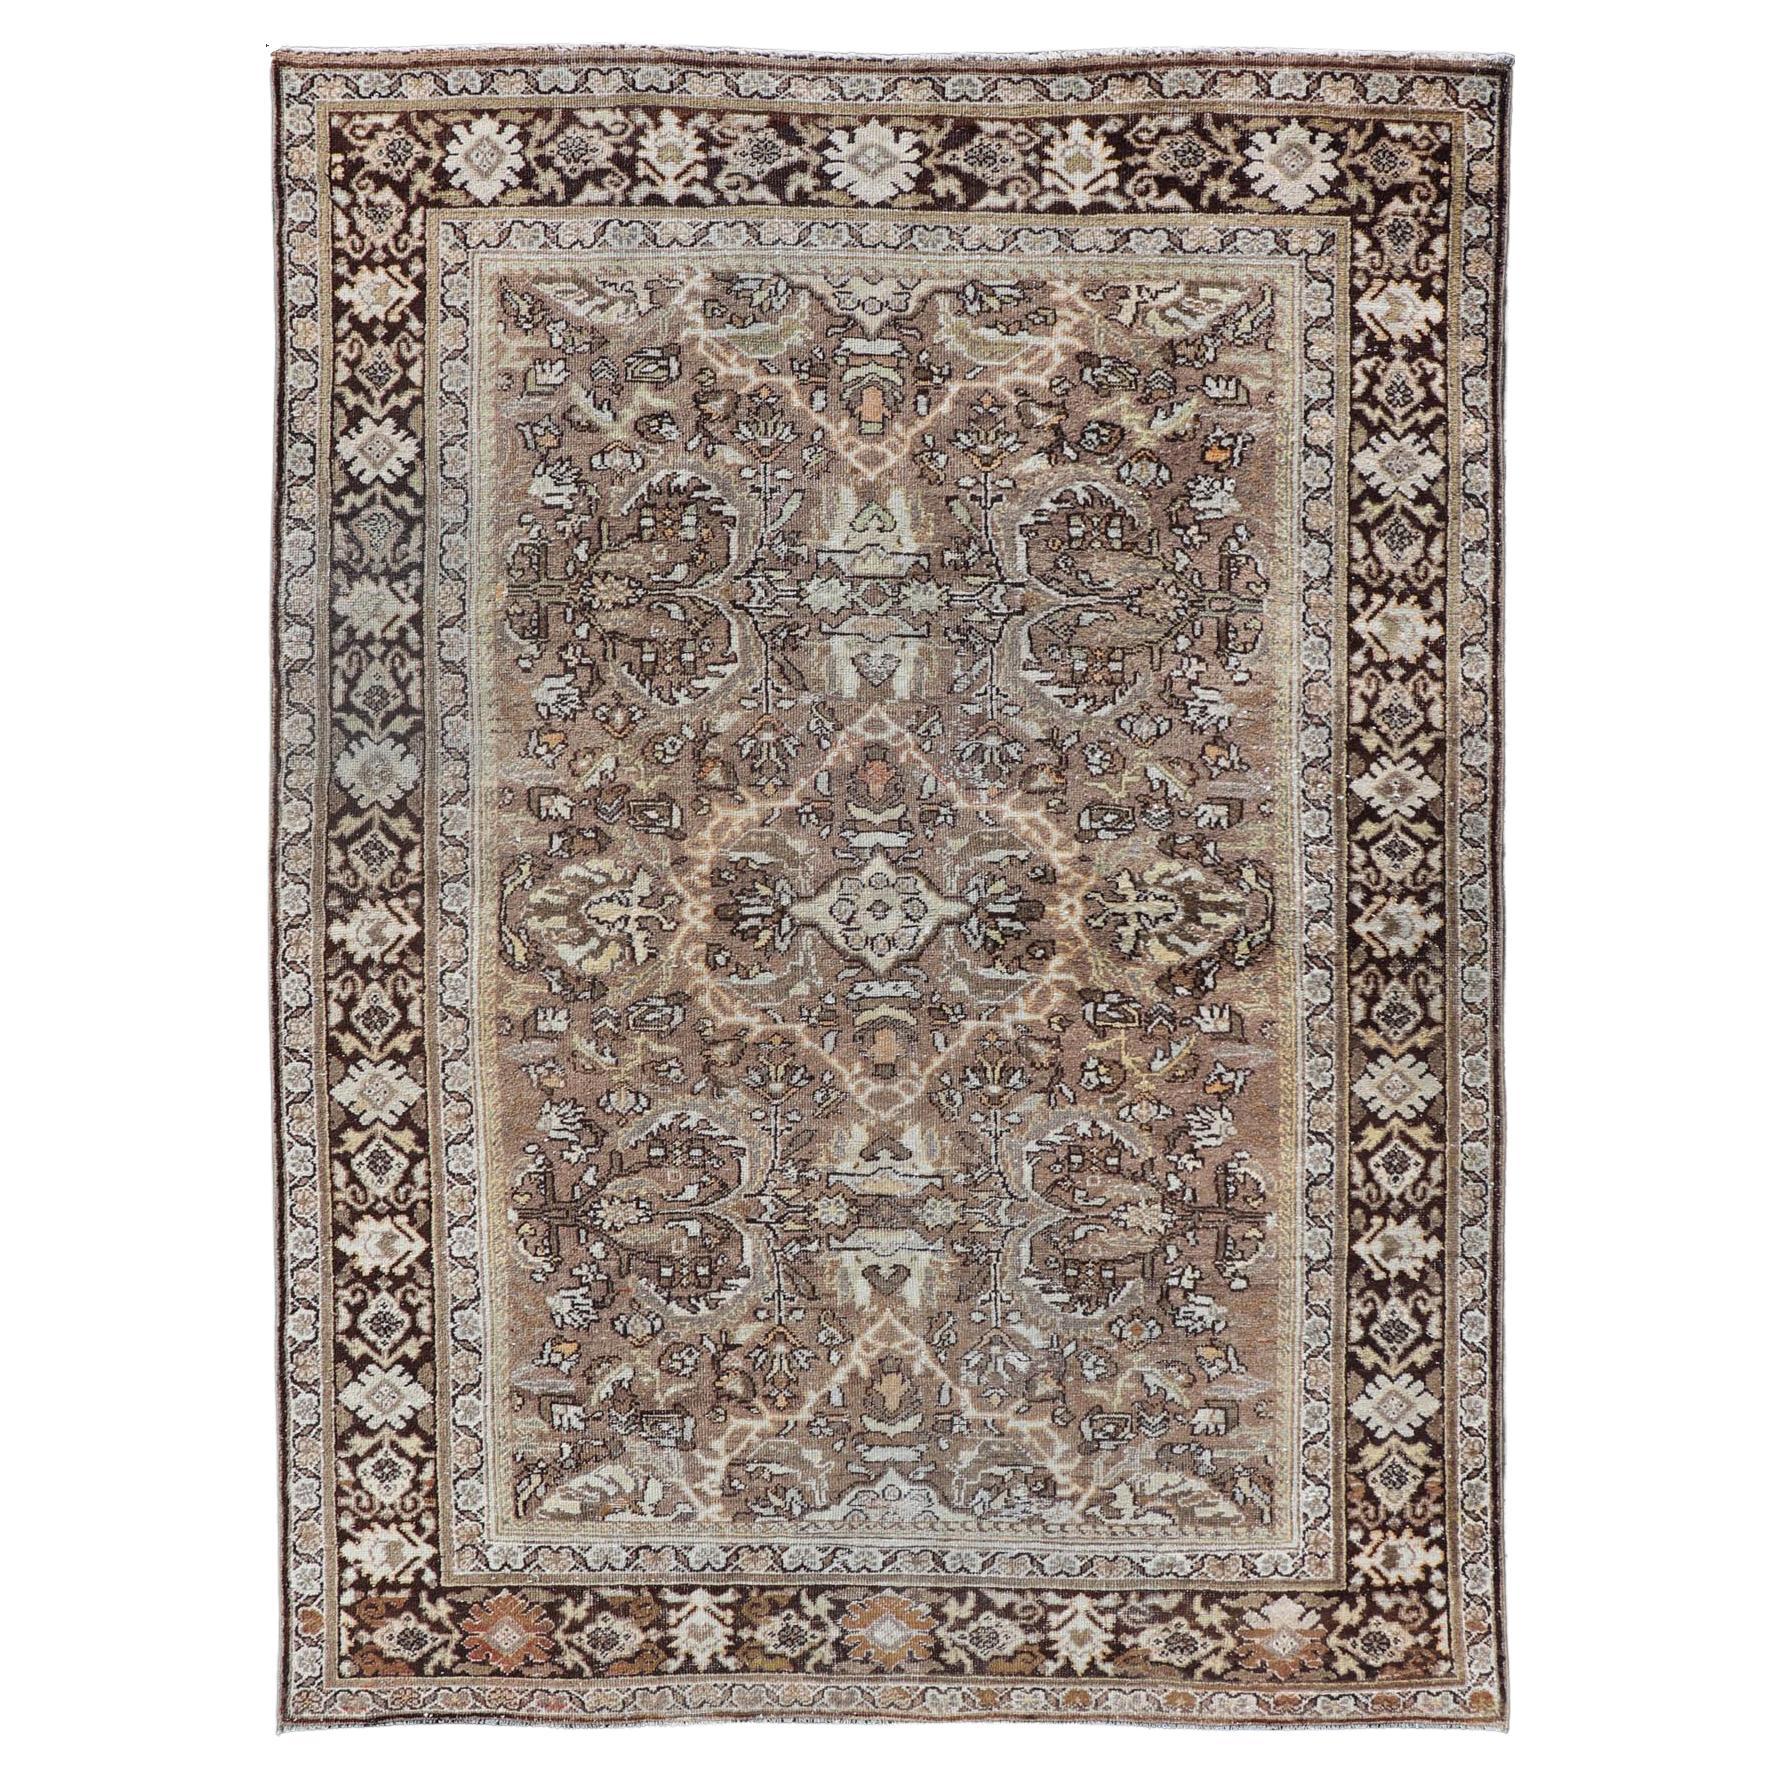 Antique Persian Sultanabad-Mahal Rug with All-Over Sub-Geometric Design